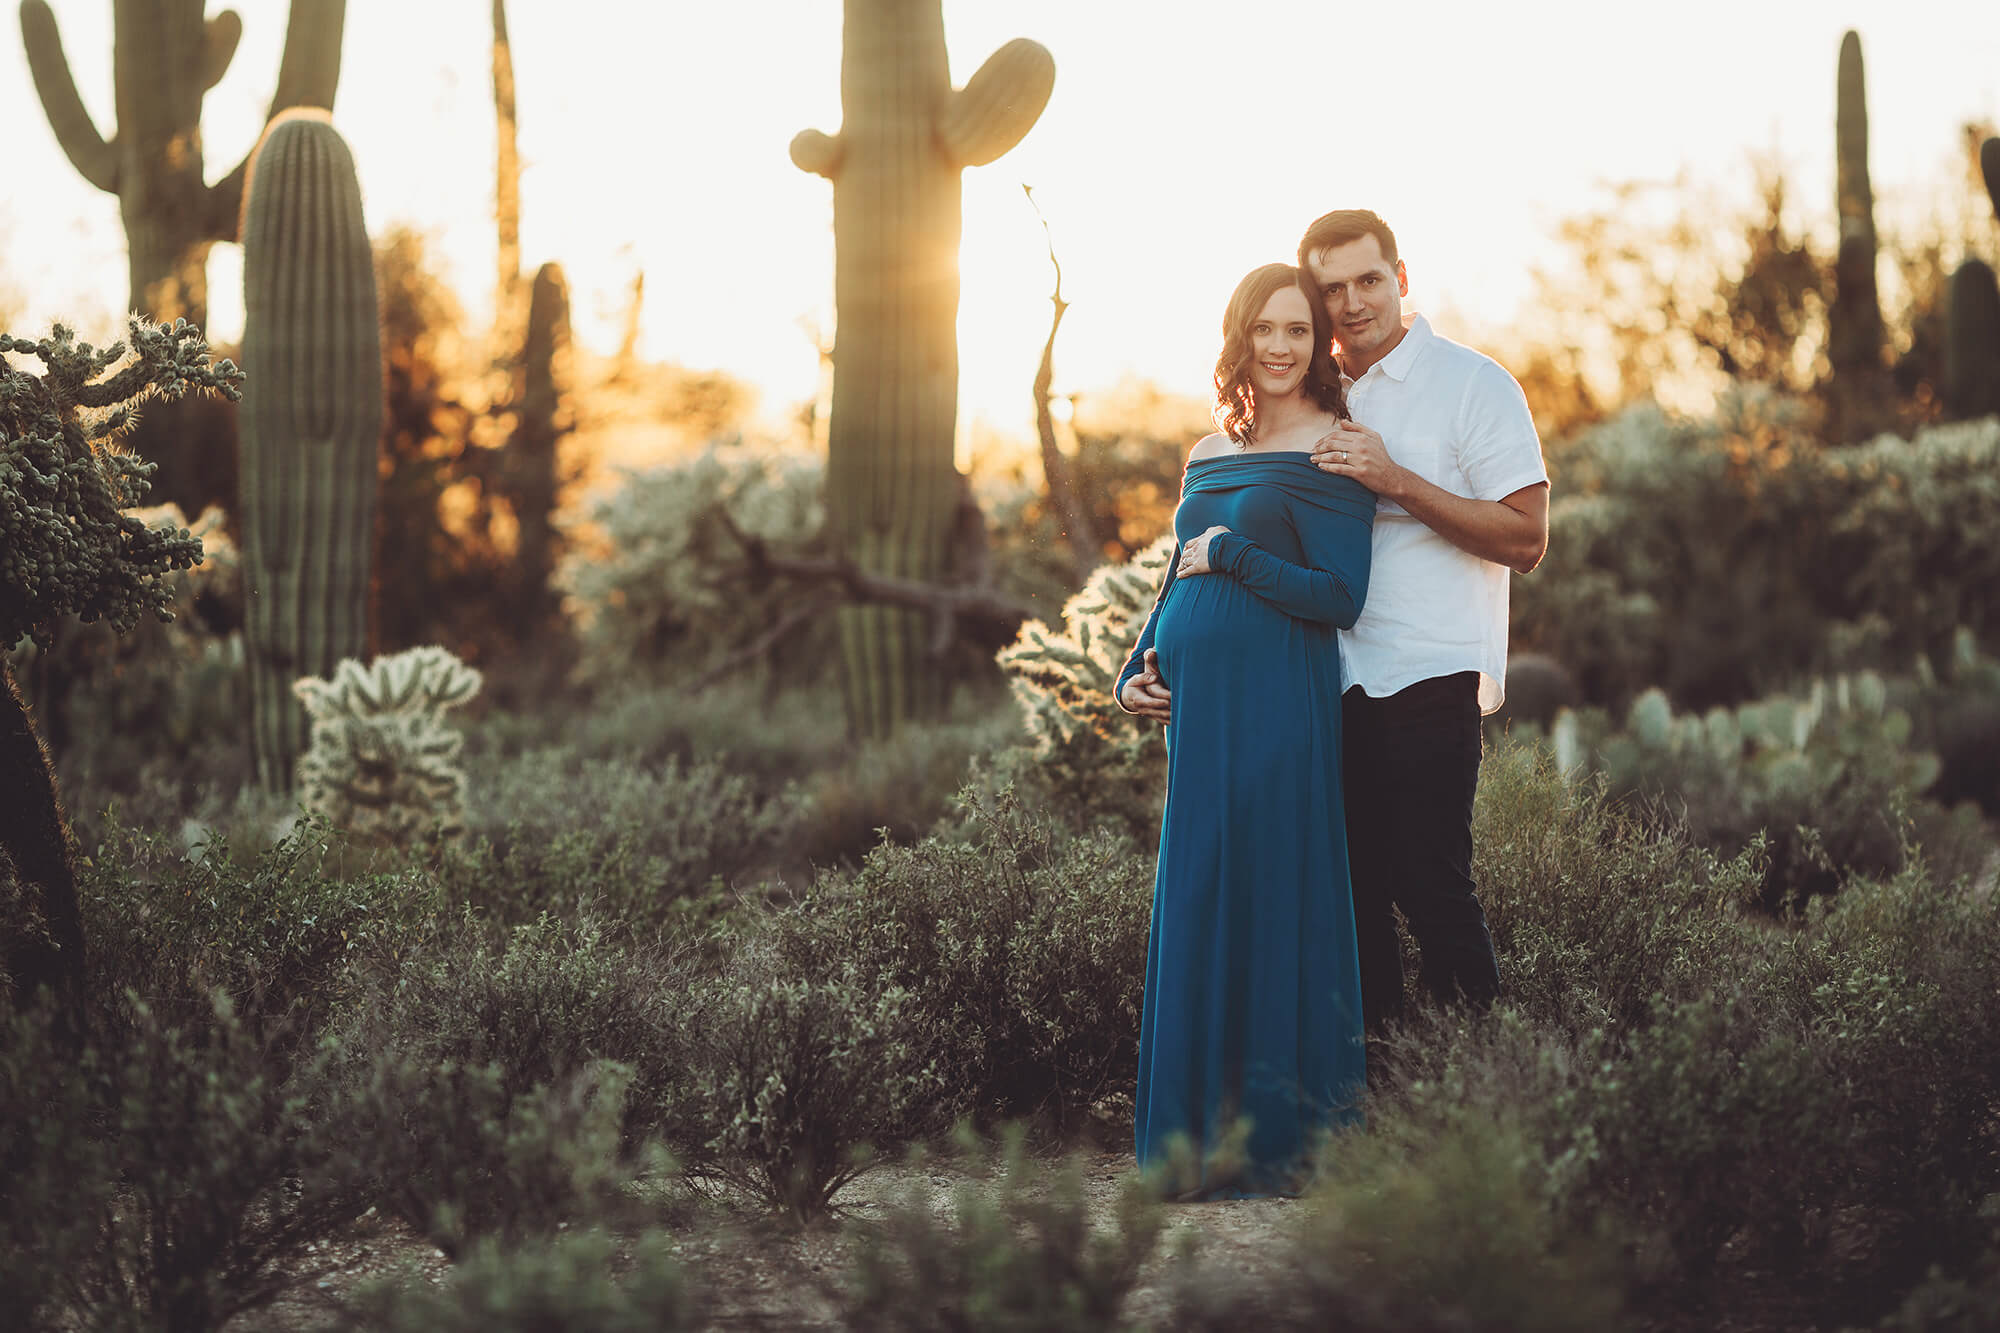 The setting sun behind one of the giant saguaros at Sabino canyon during Adrianne's maternity session